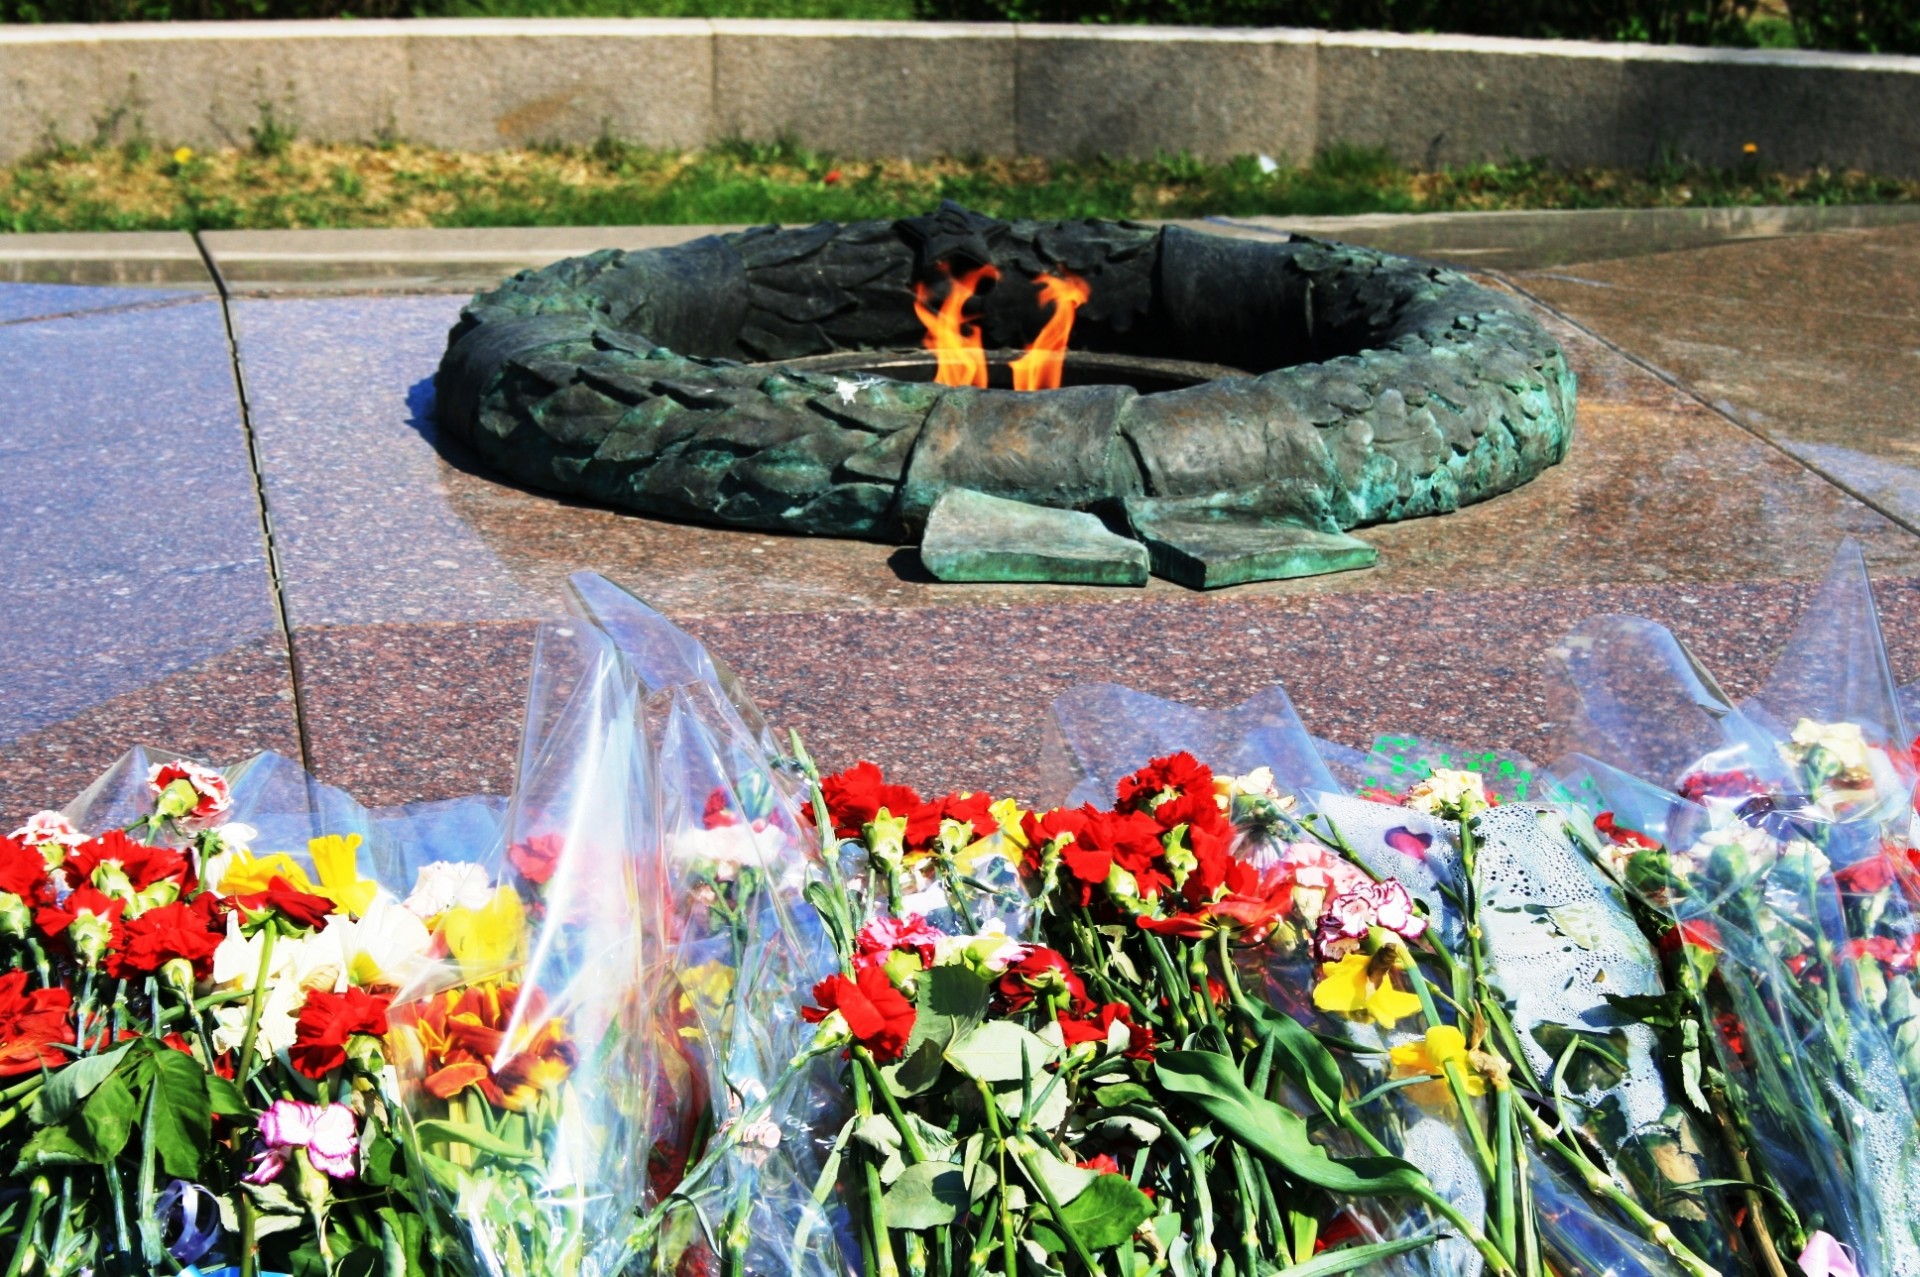 eternal flame for the unknown soldier, dimitrov, near moscow